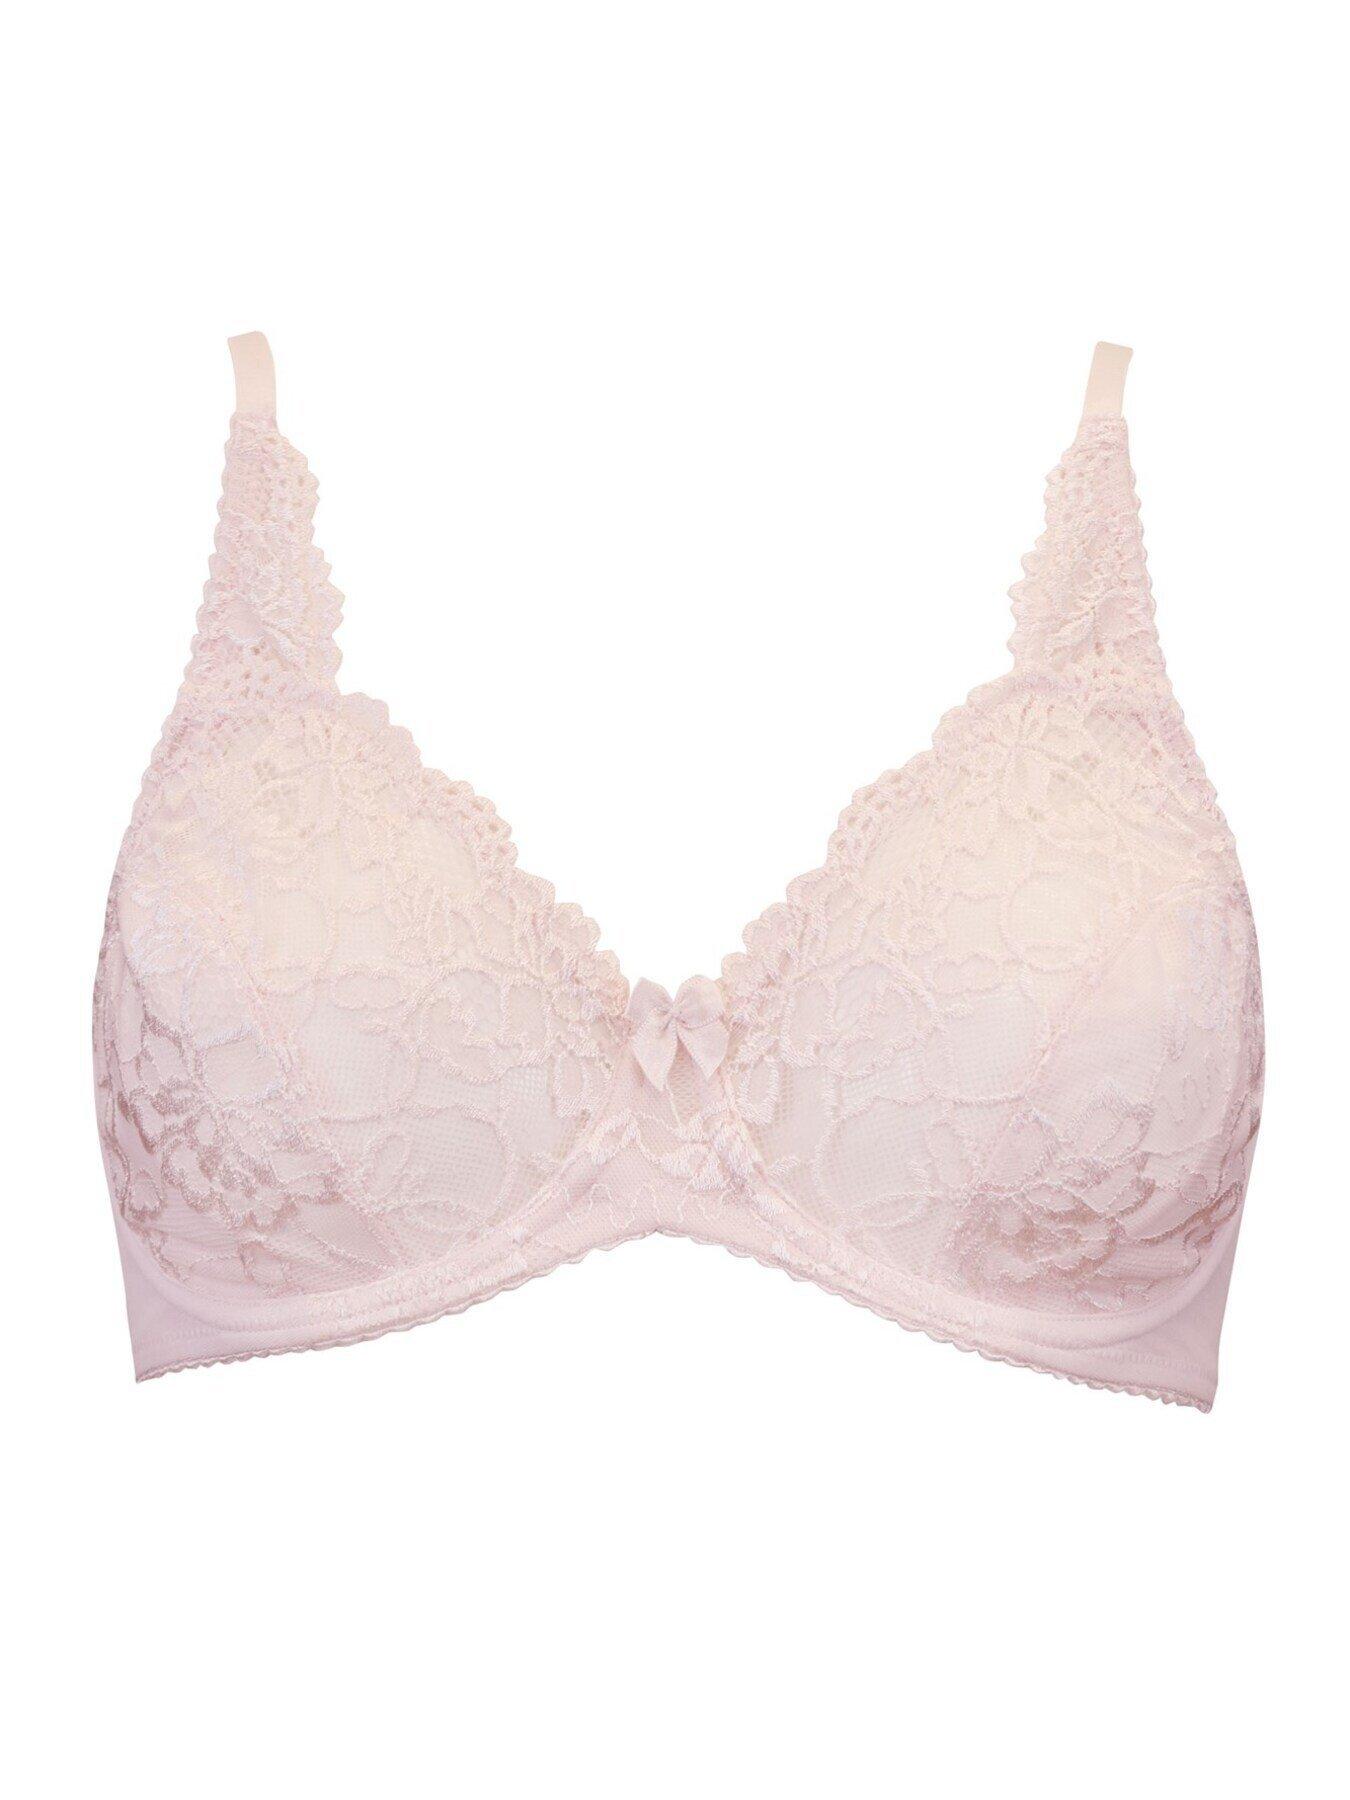 Pour Moi Rosalind Full Cup Underwired Bra - Light Pink